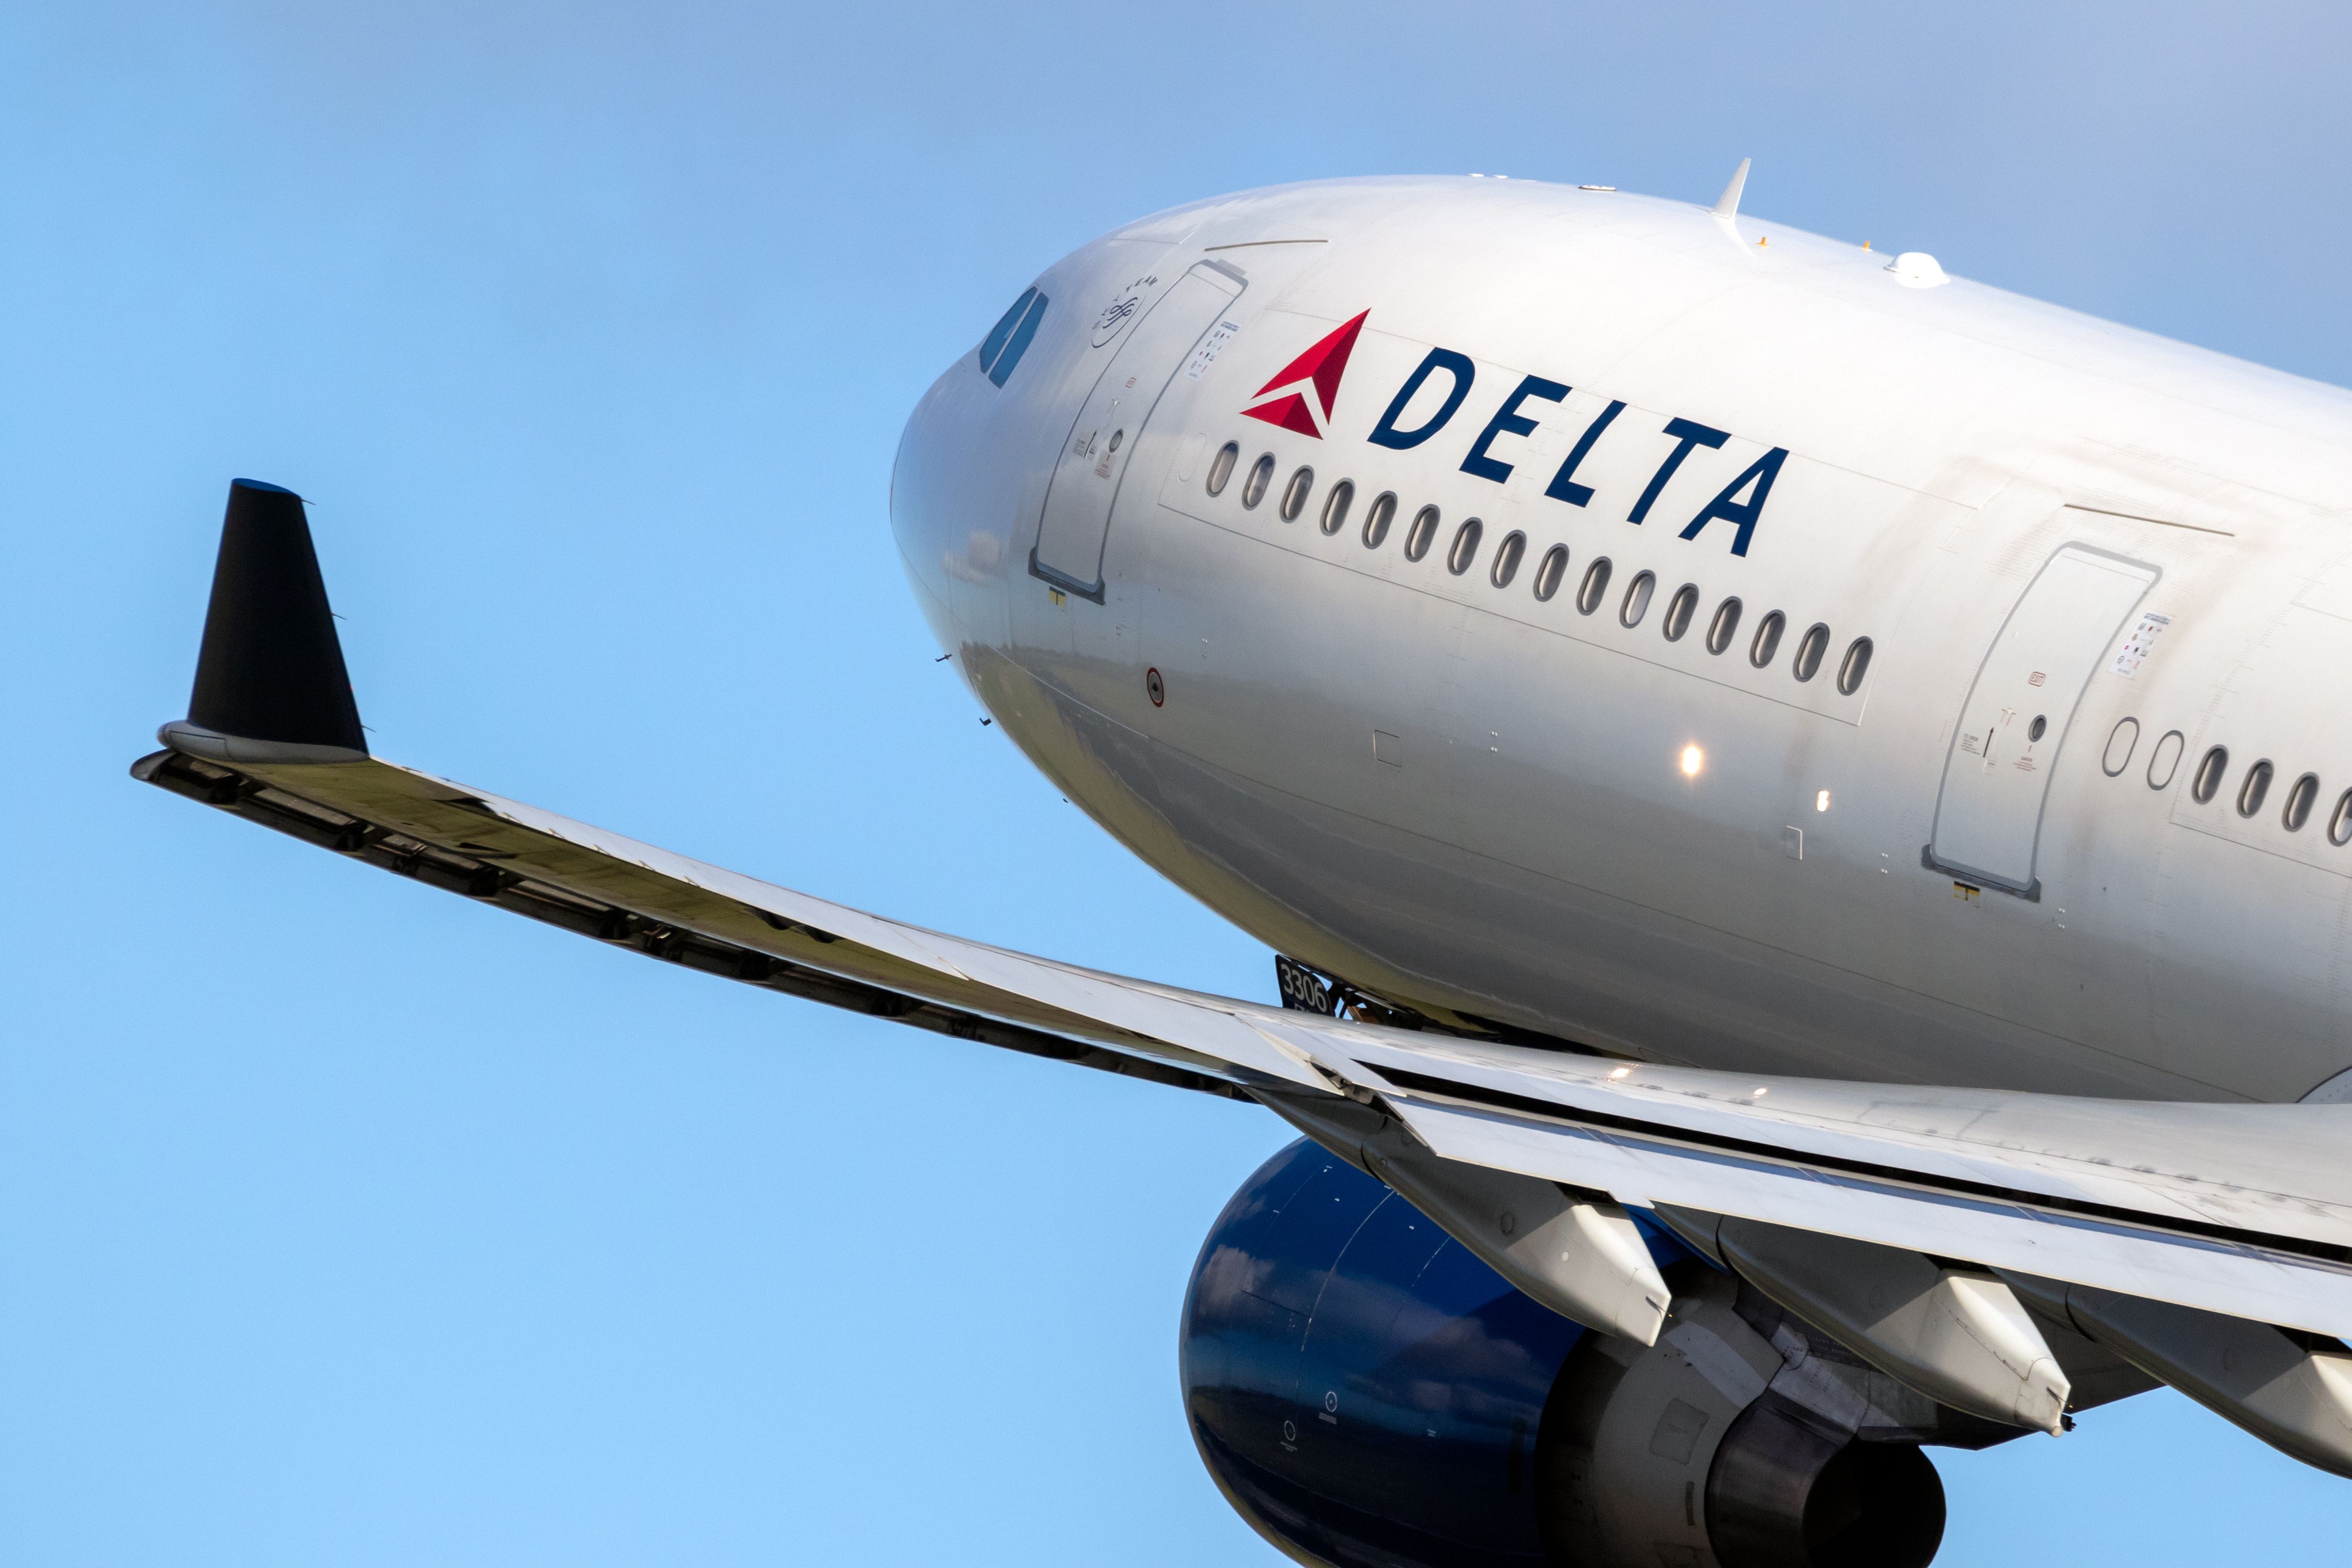 Delta Air Lines Airbus A330 taking off